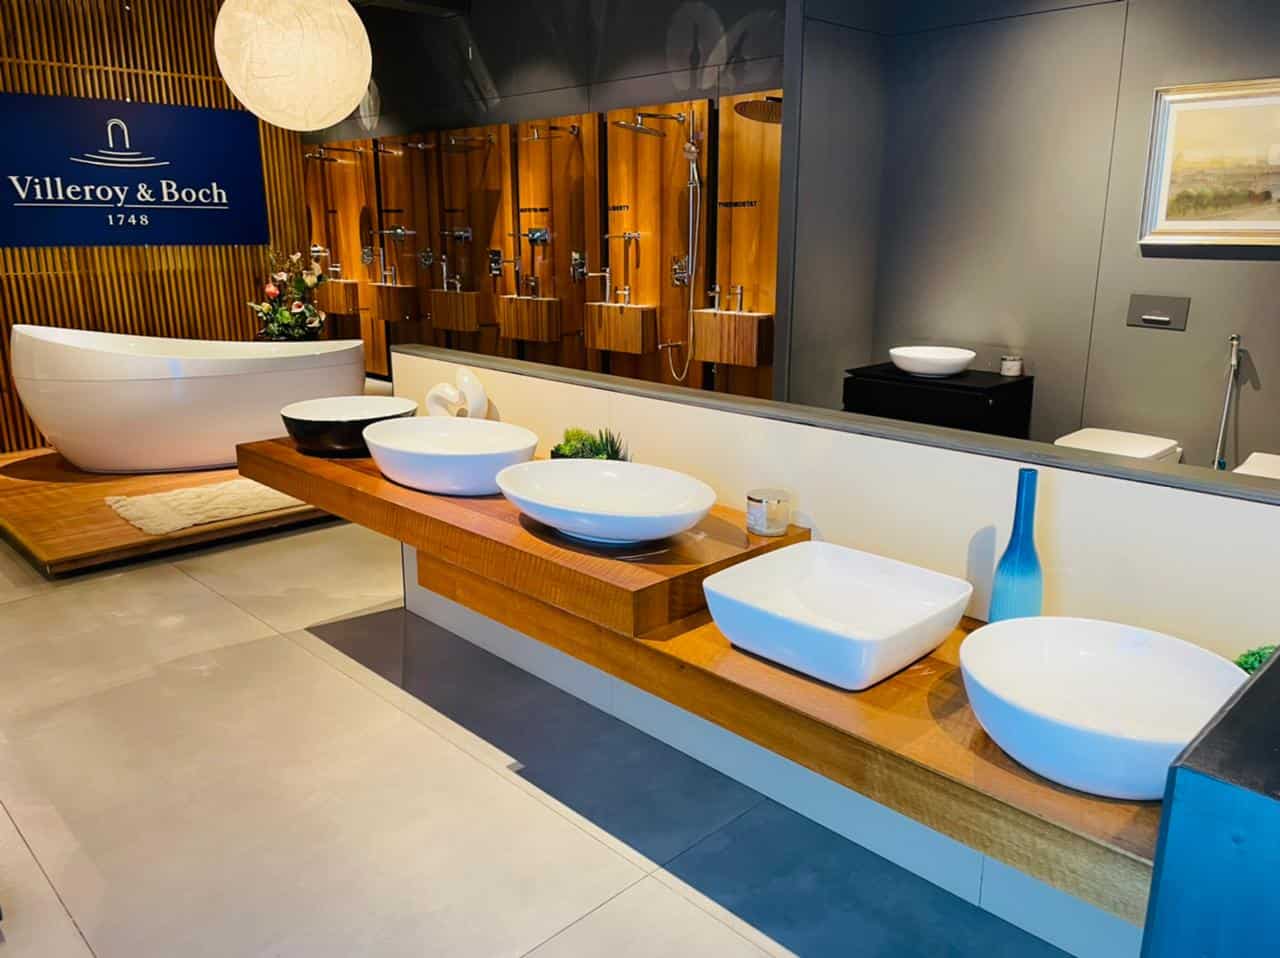 Villeroy & Boch display at Quattroluxe - sanitary ware retailer in Bangalore